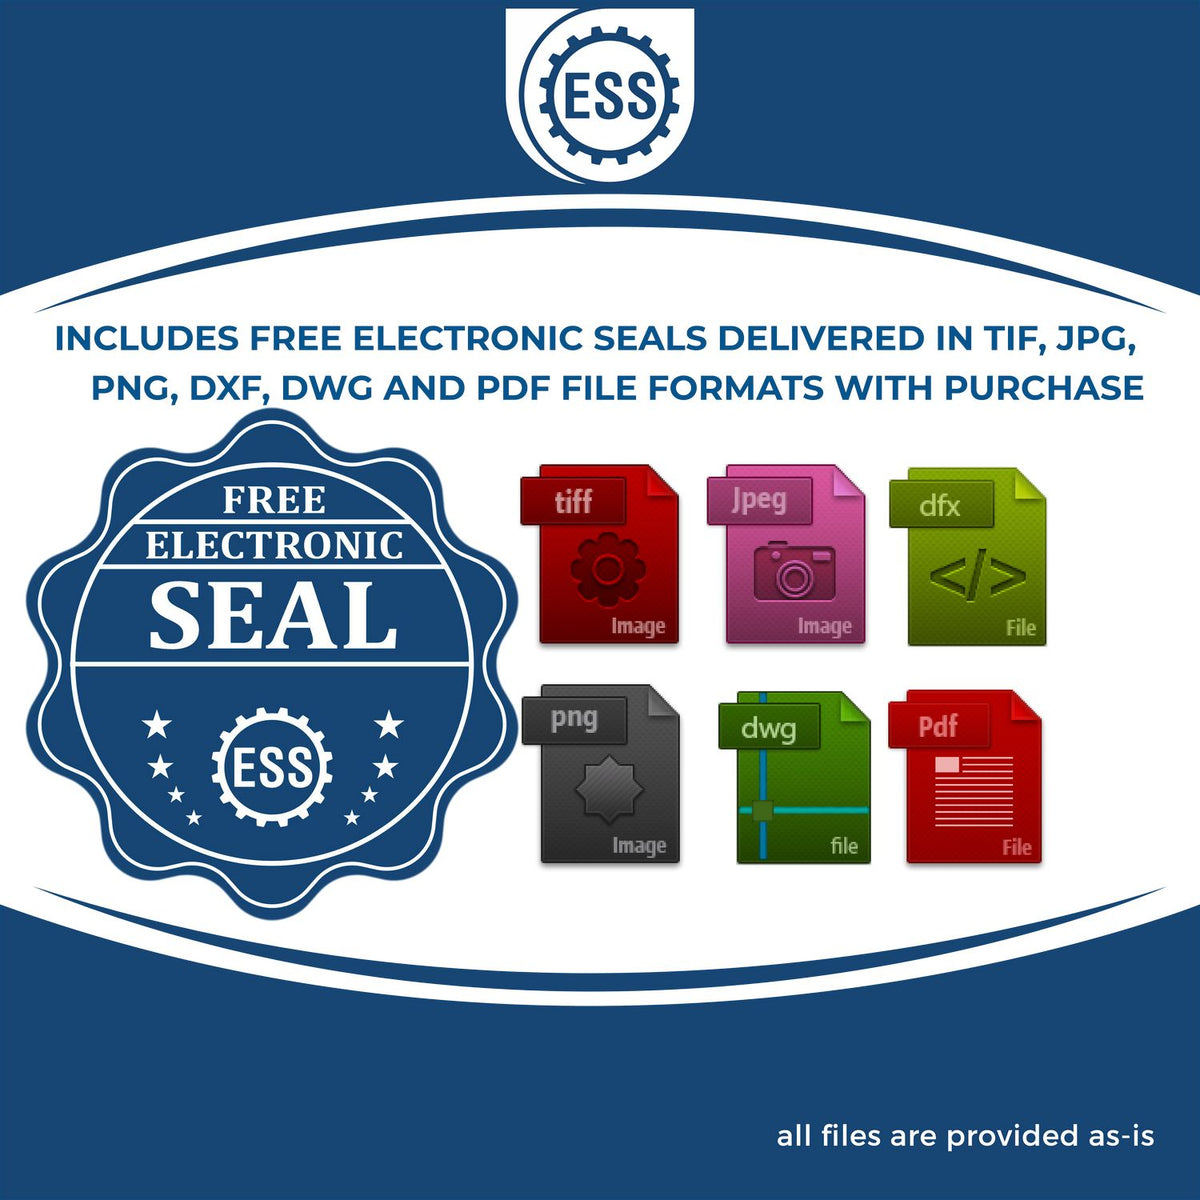 An infographic for the free electronic seal for the MaxLight Premium Pre-Inked Georgia Rectangular Notarial Stamp illustrating the different file type icons such as DXF, DWG, TIF, JPG and PNG.